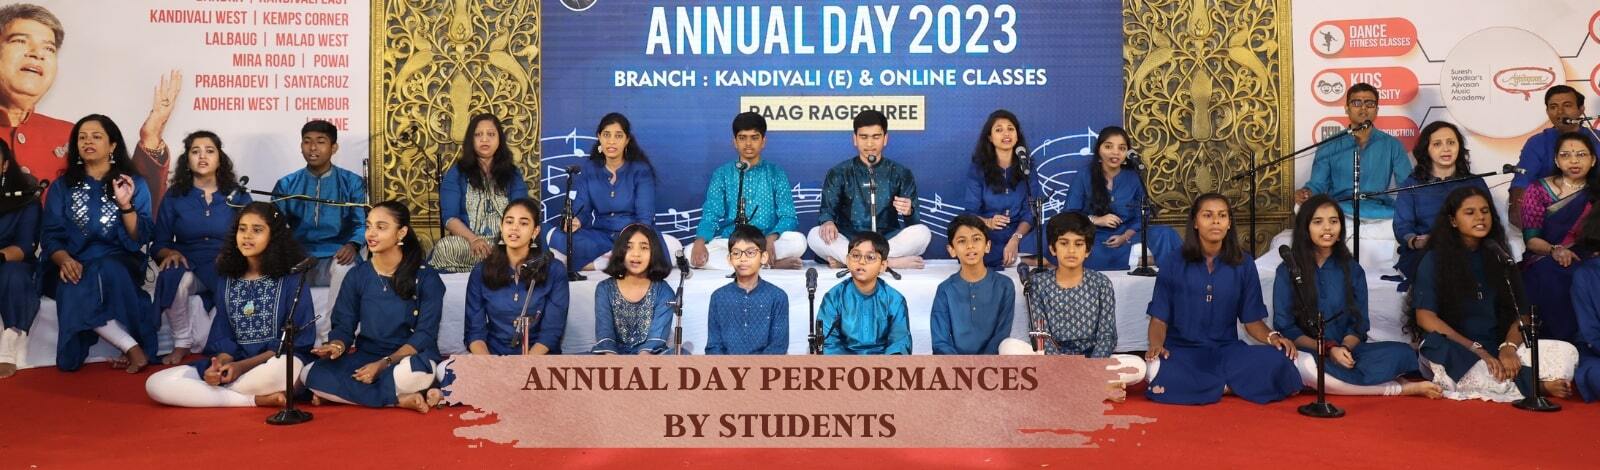 ANNUAL DAY PERFORMANCES BY STUDENTS min Ajivasan Music and Dance Academy